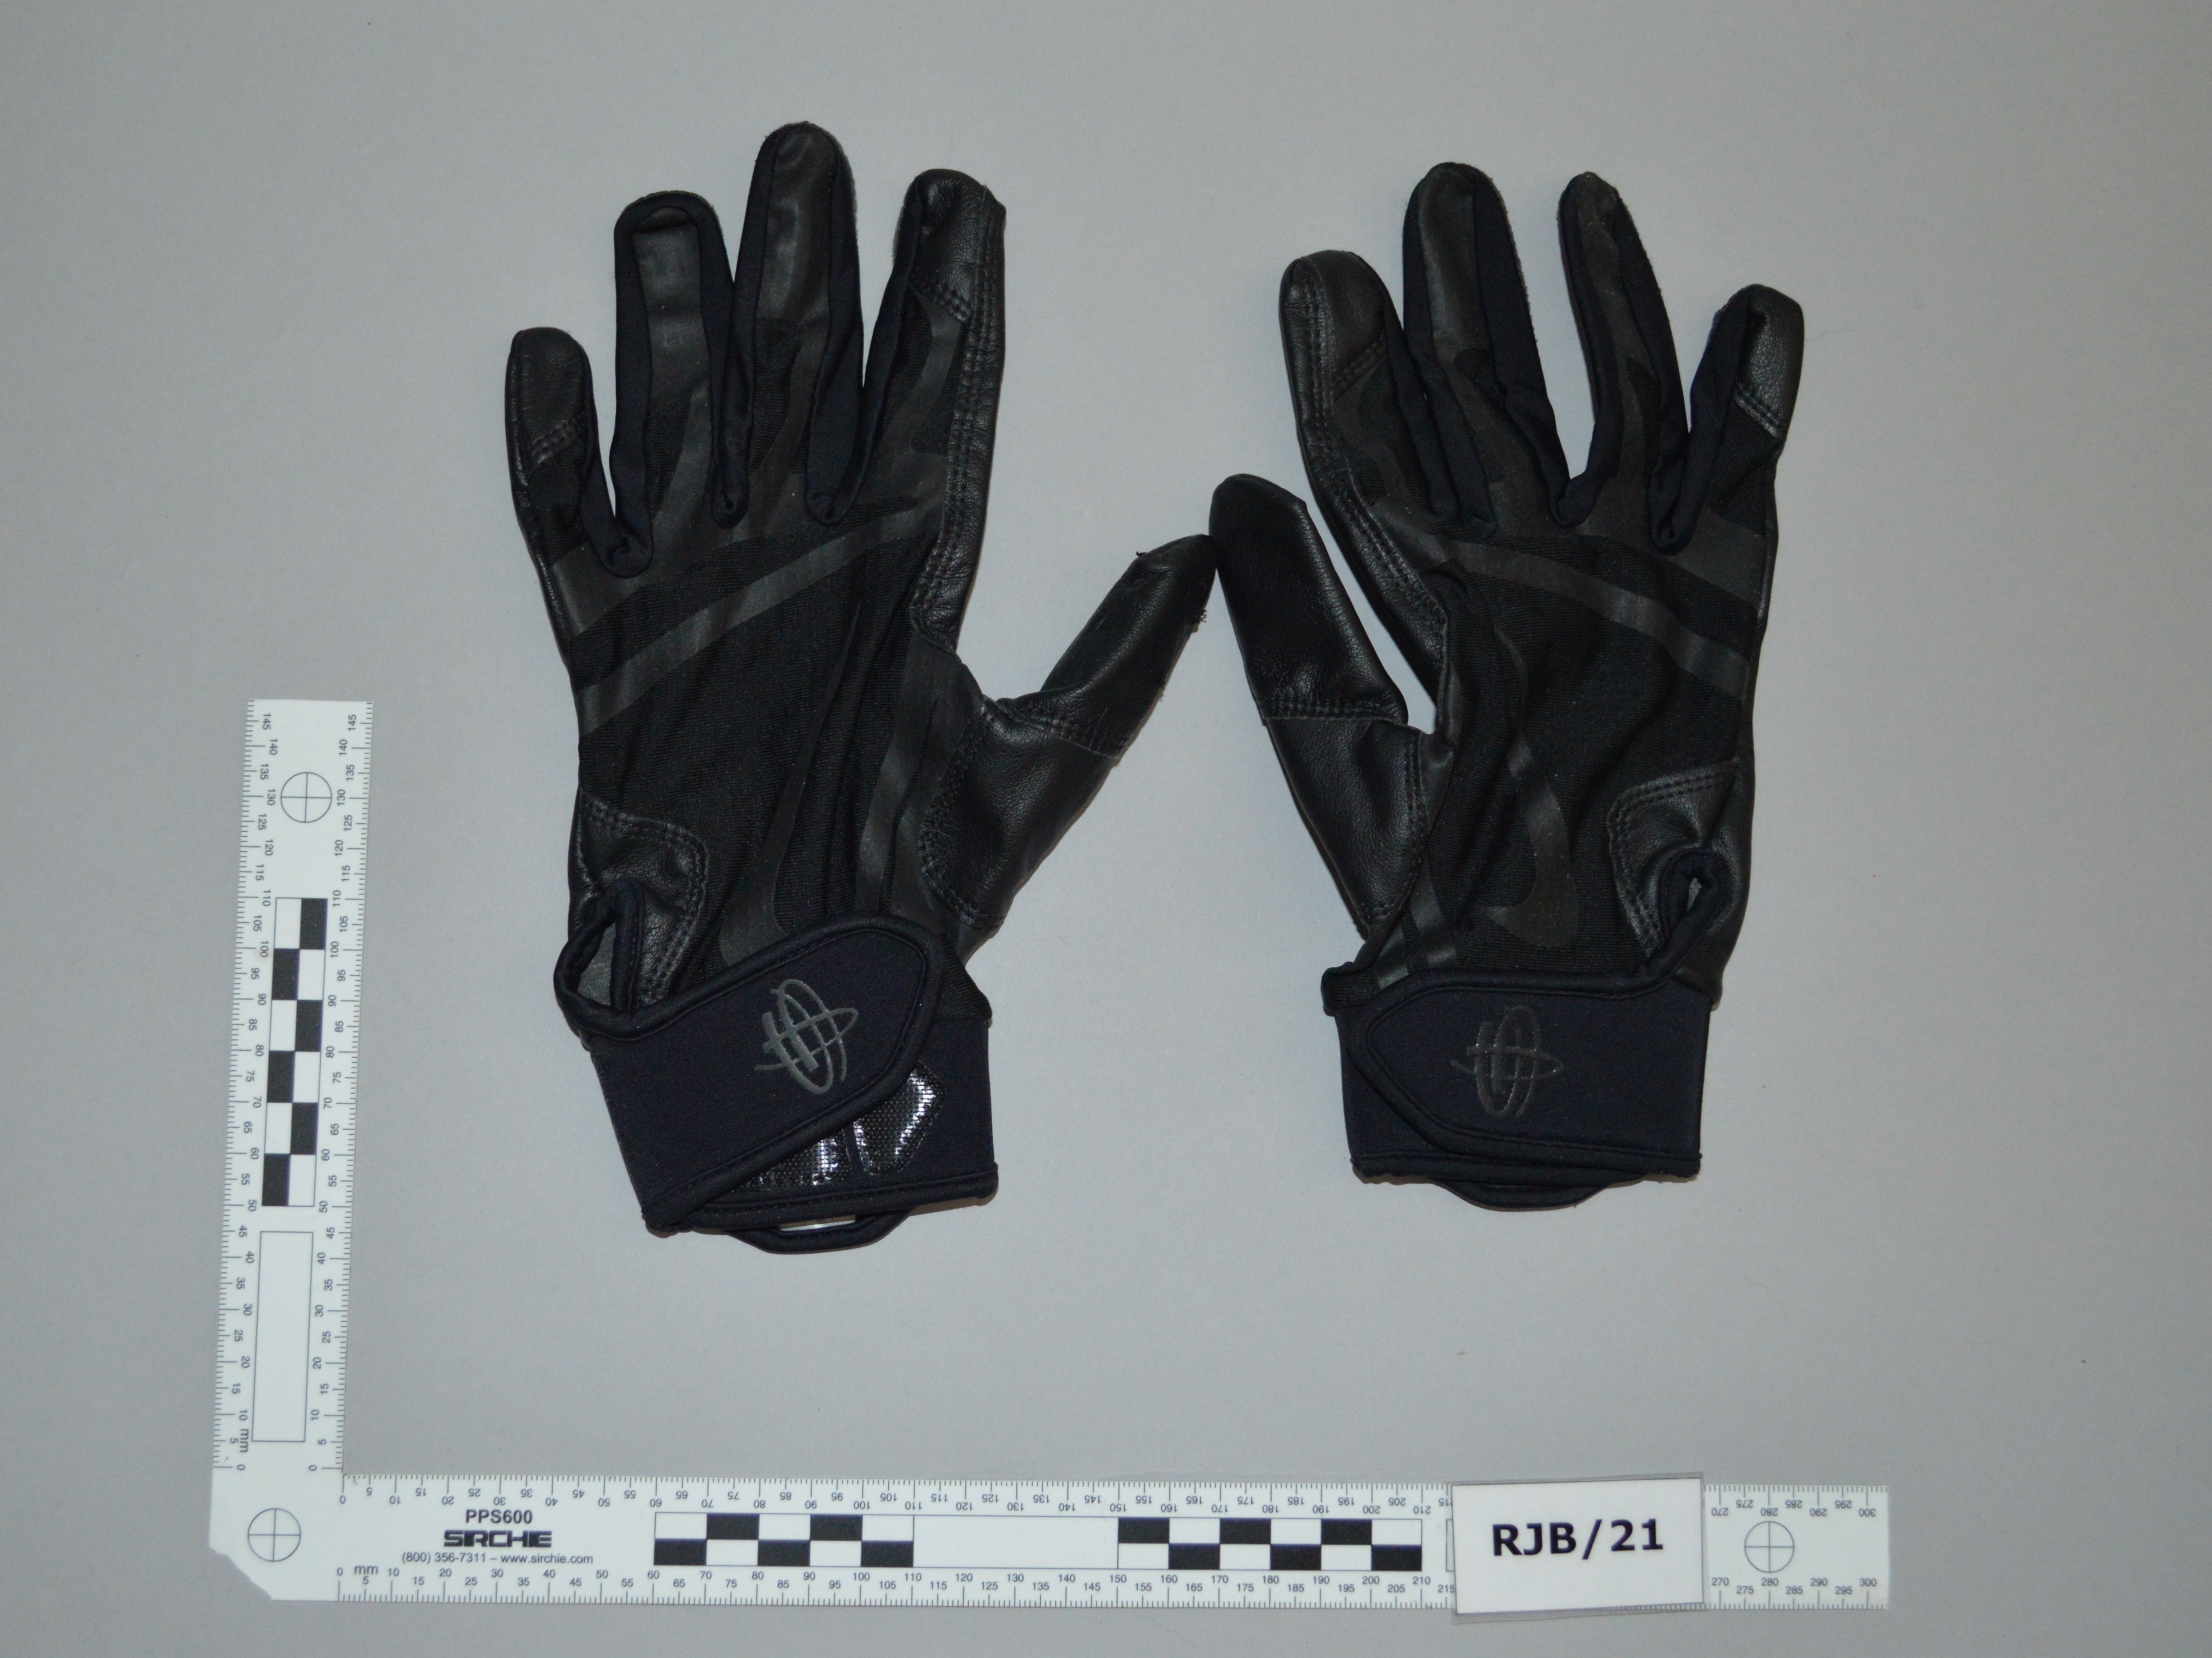 ‘Tactical gloves’ purchased by King, who admitted preparing acts of terrorism